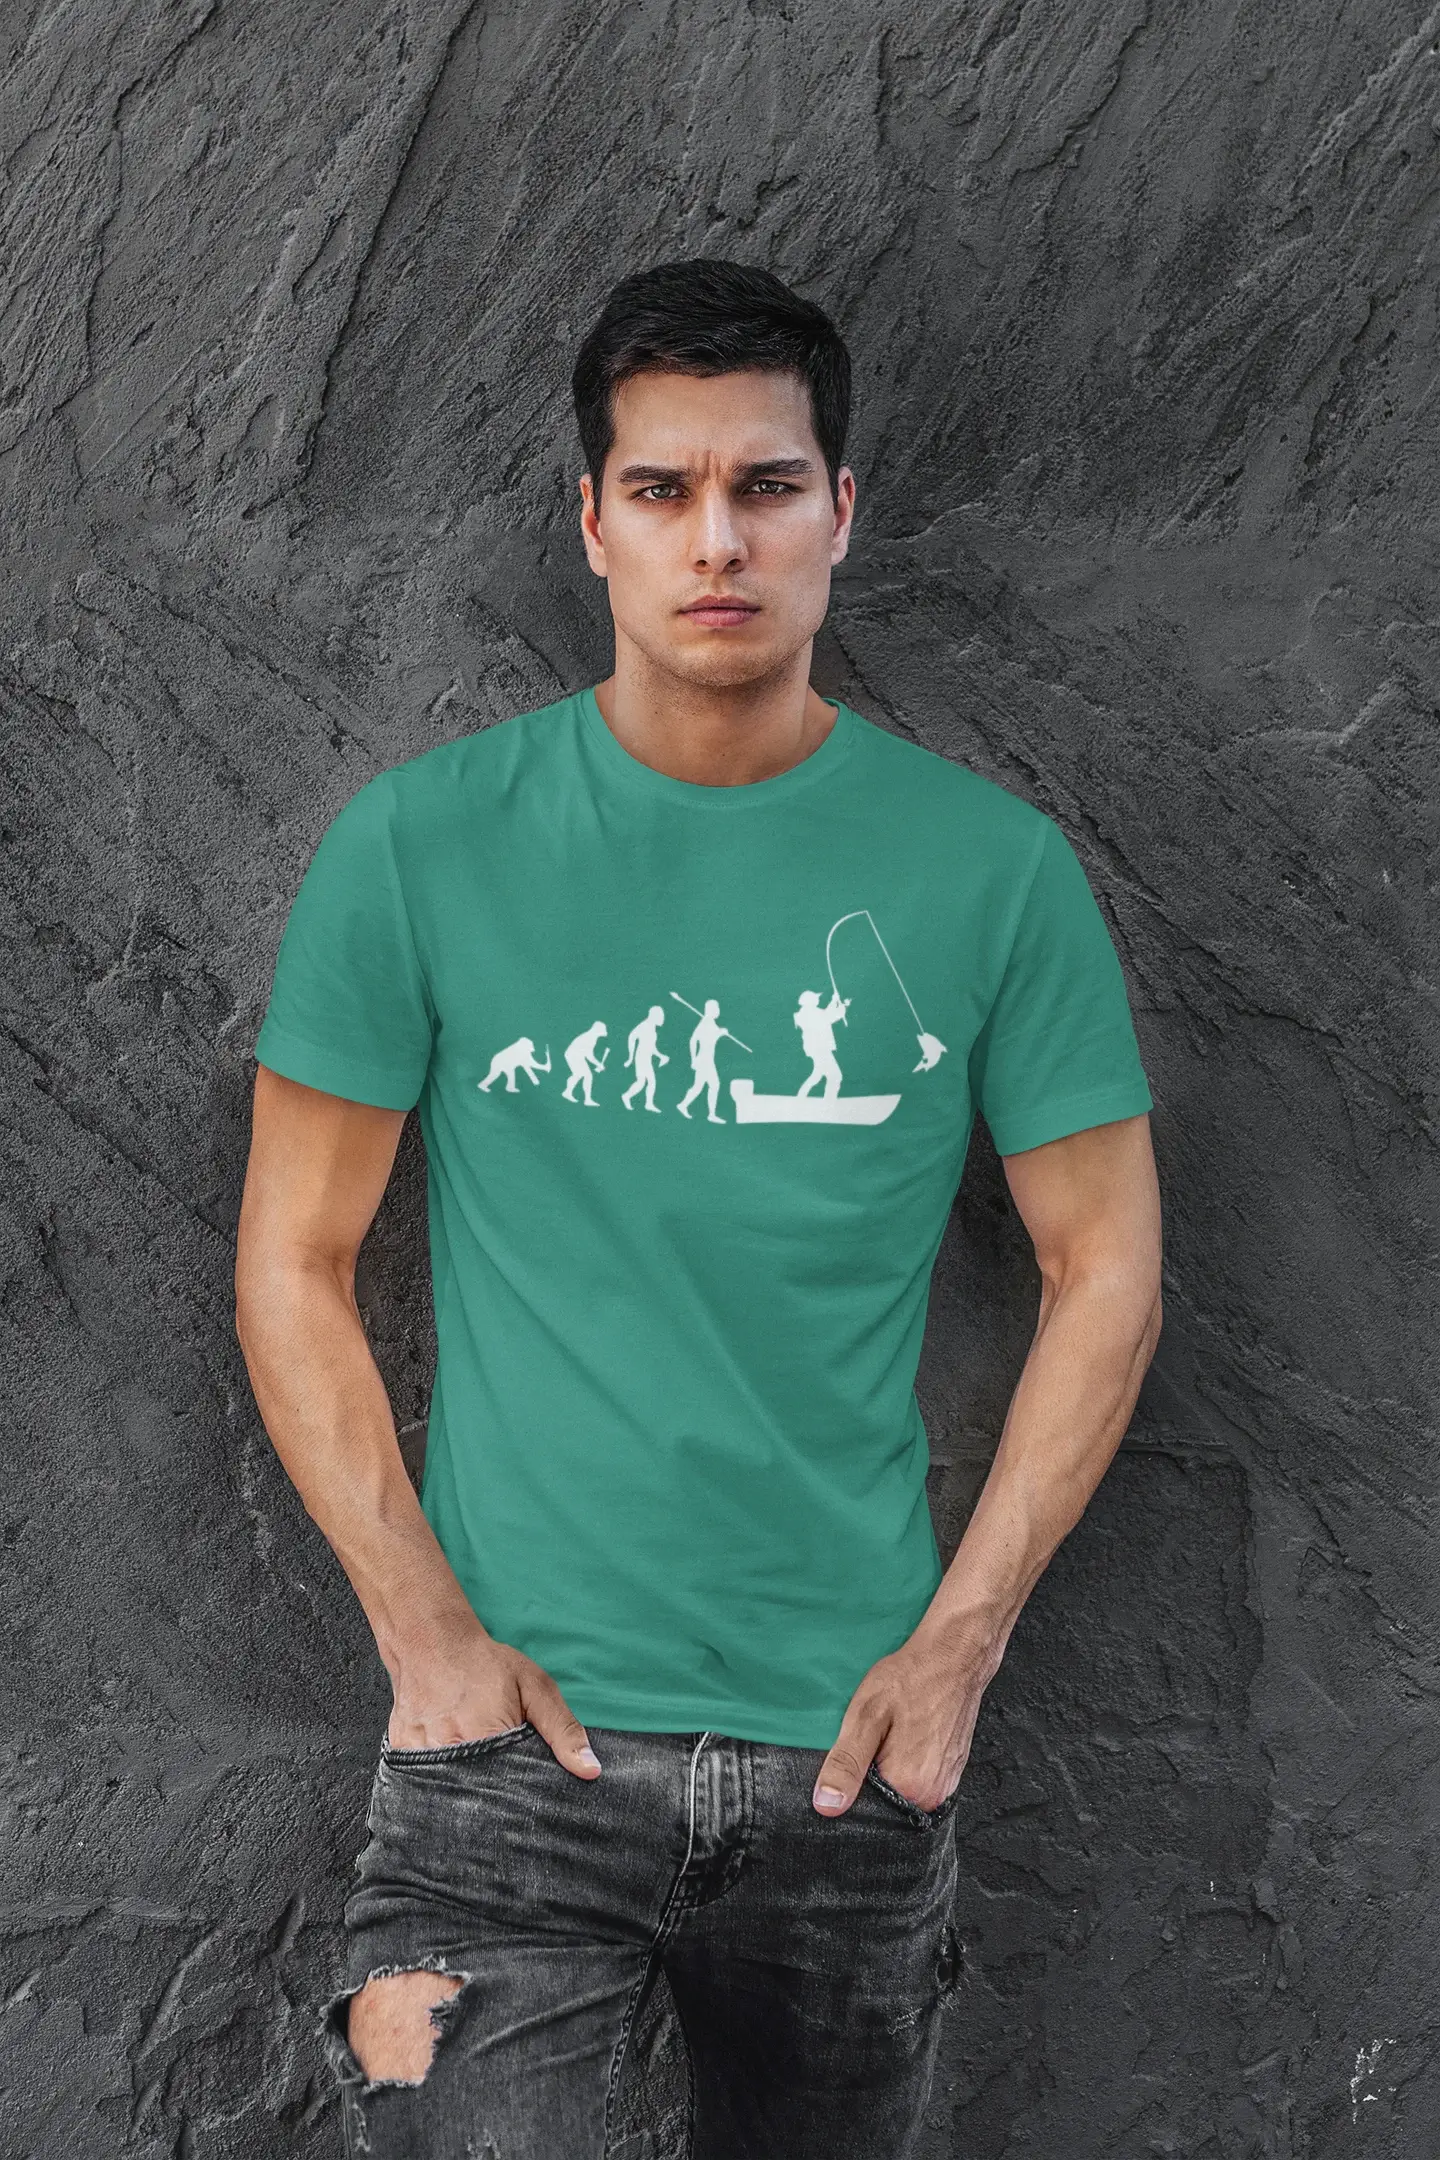 ULTRABASIC - Graphic Printed Men's Evolution of the Fishing Boat T-Shirt Military Green